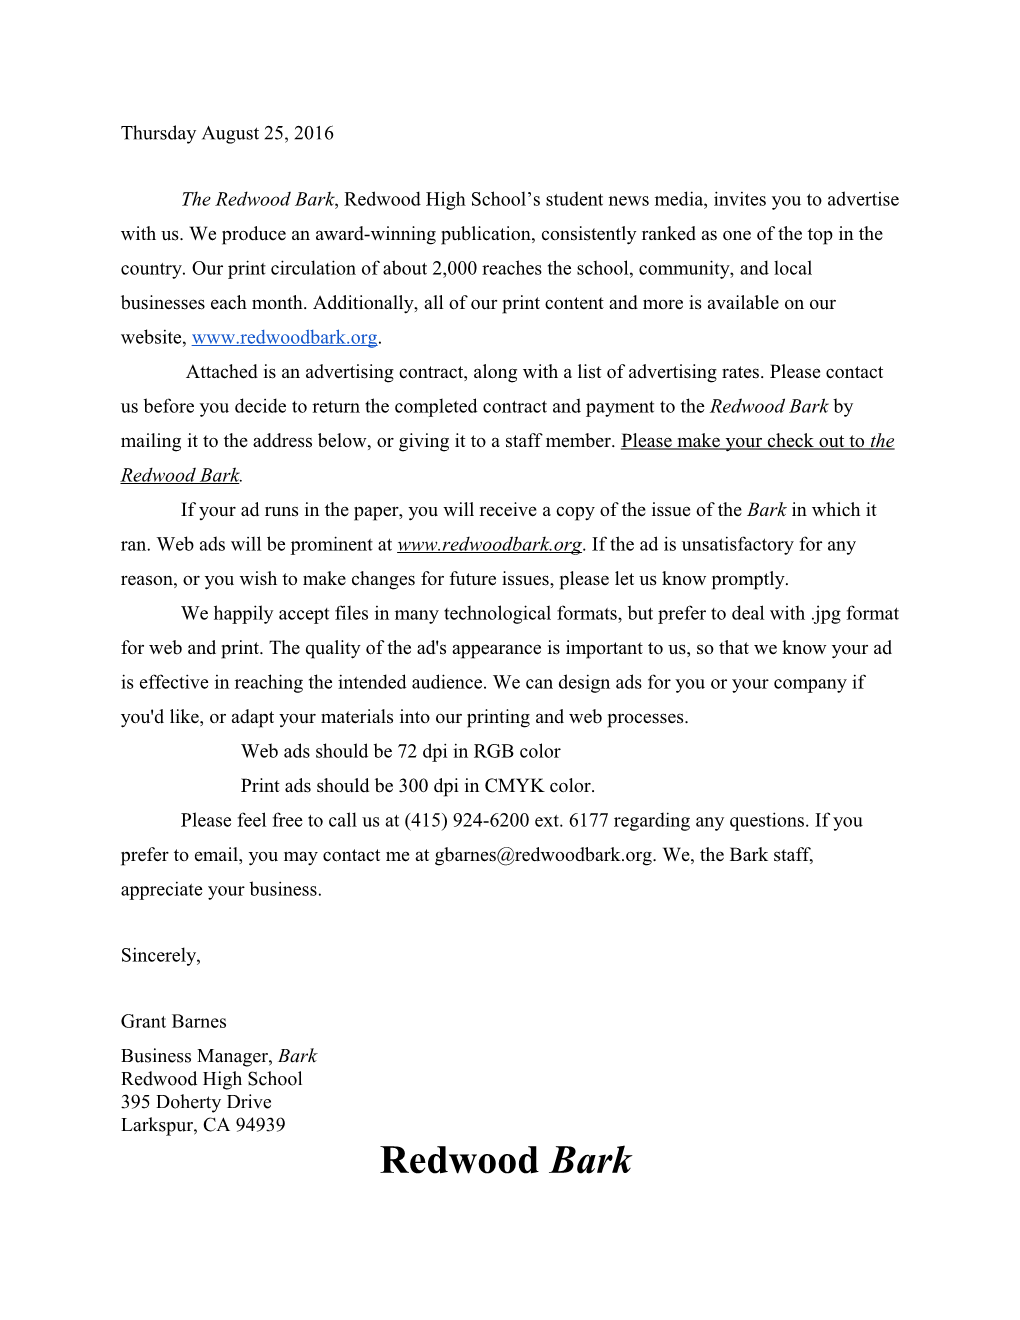 The Redwood Bark, Redwood High School S Student News Media, Invites You to Advertise With